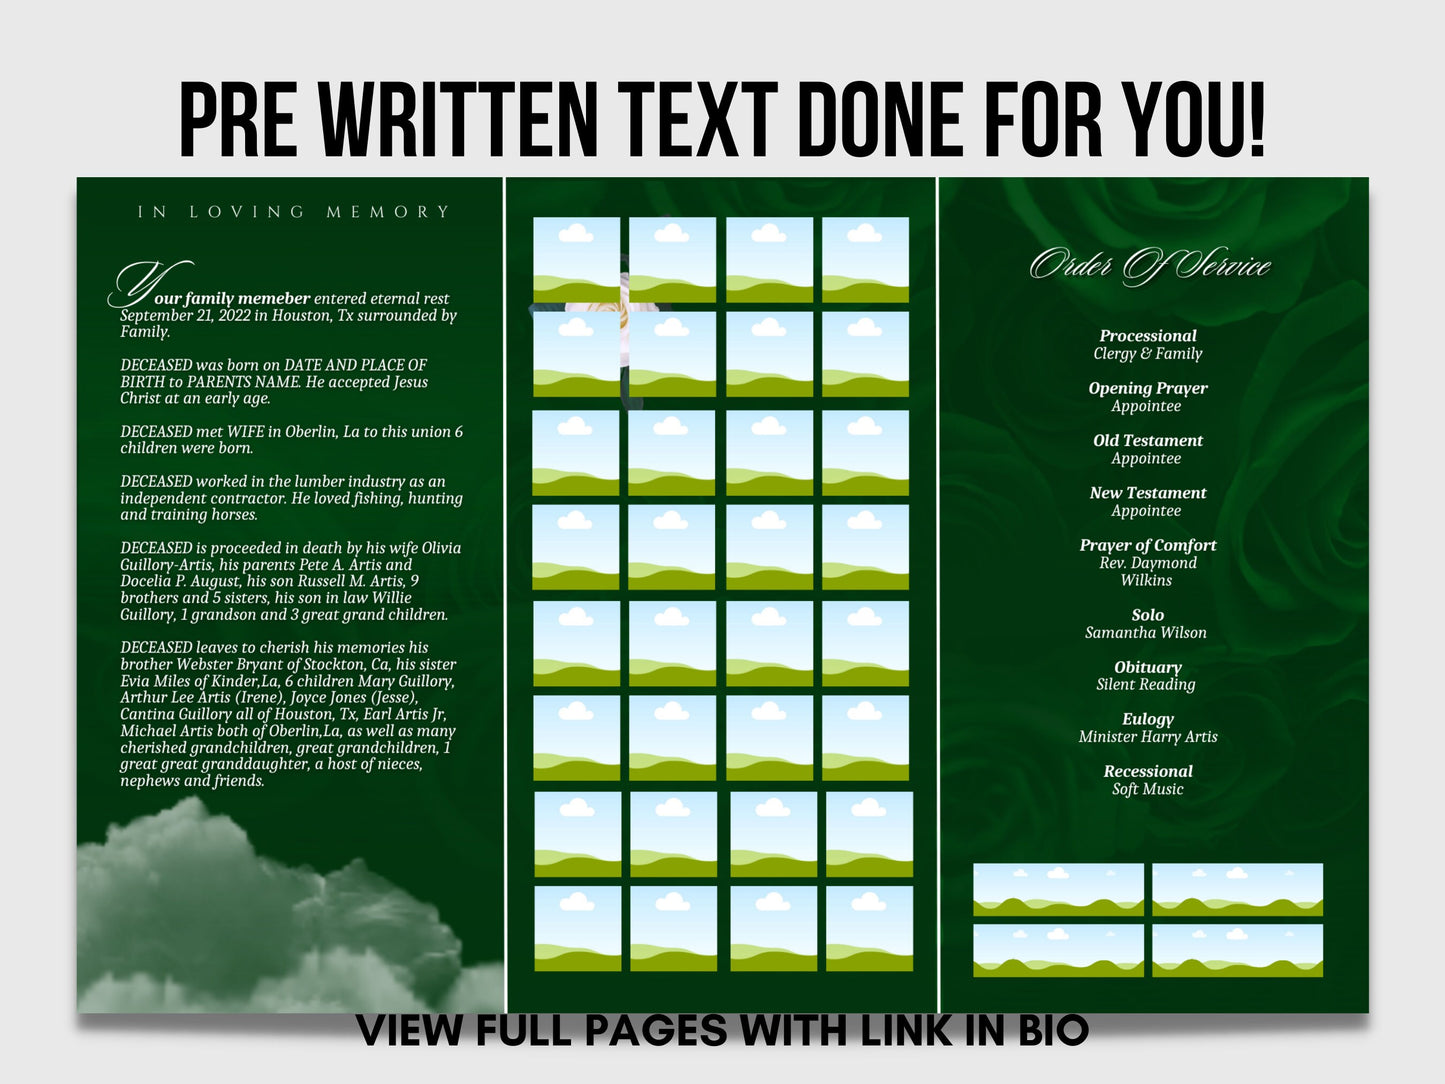 17"x11" FUNERAL OBITUARY TEMPLATE (2 pages) |Elegant Style Funeral Program | Celebration of Life |Unisex green Obituary |Canva Template